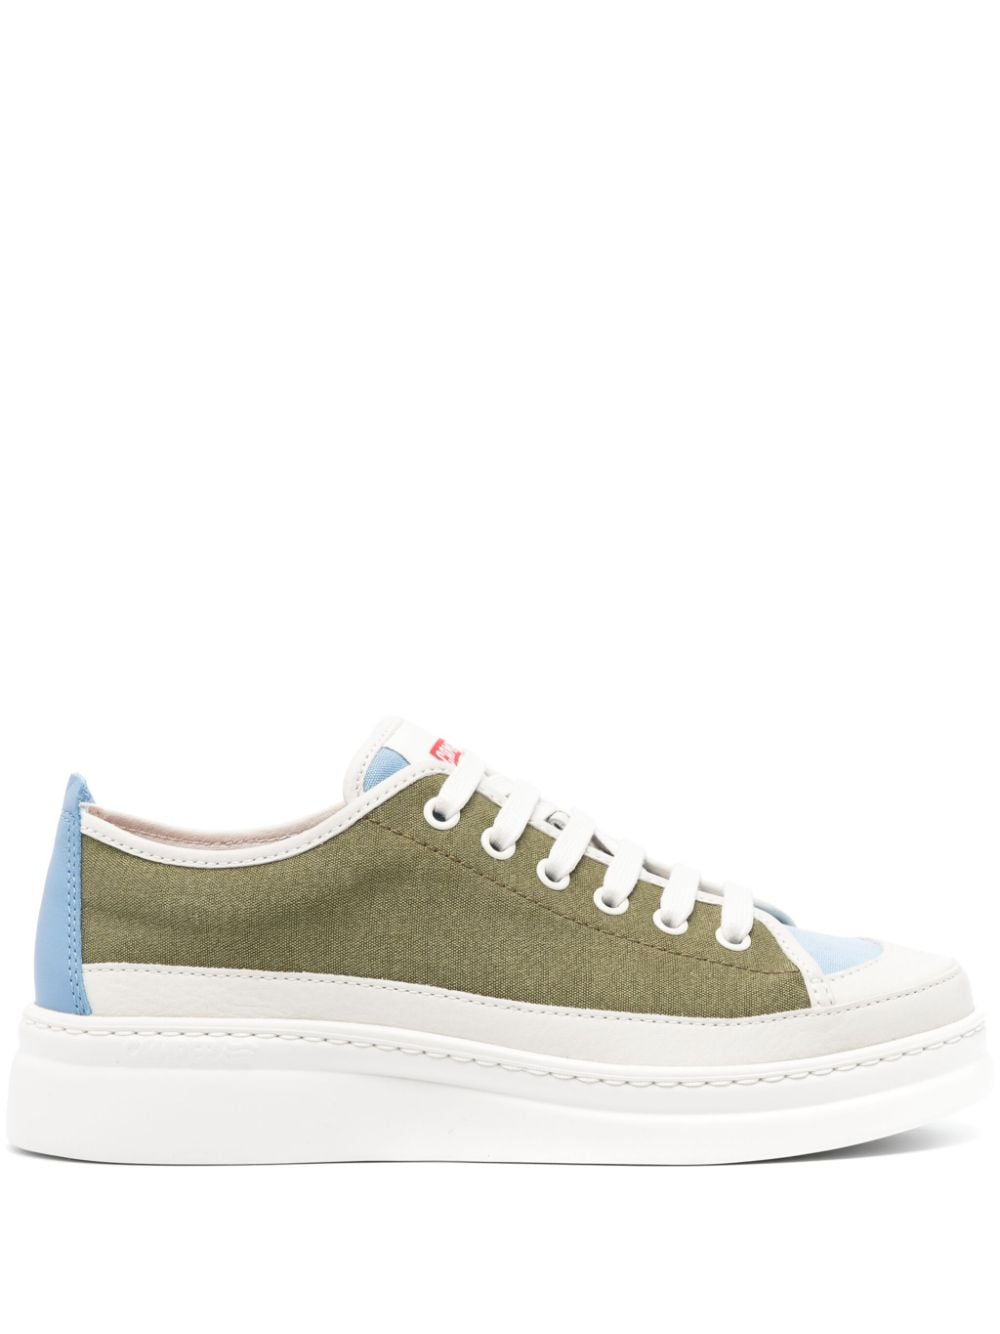 Camper Runner Up Twins Panelled Trainers In Green Multi